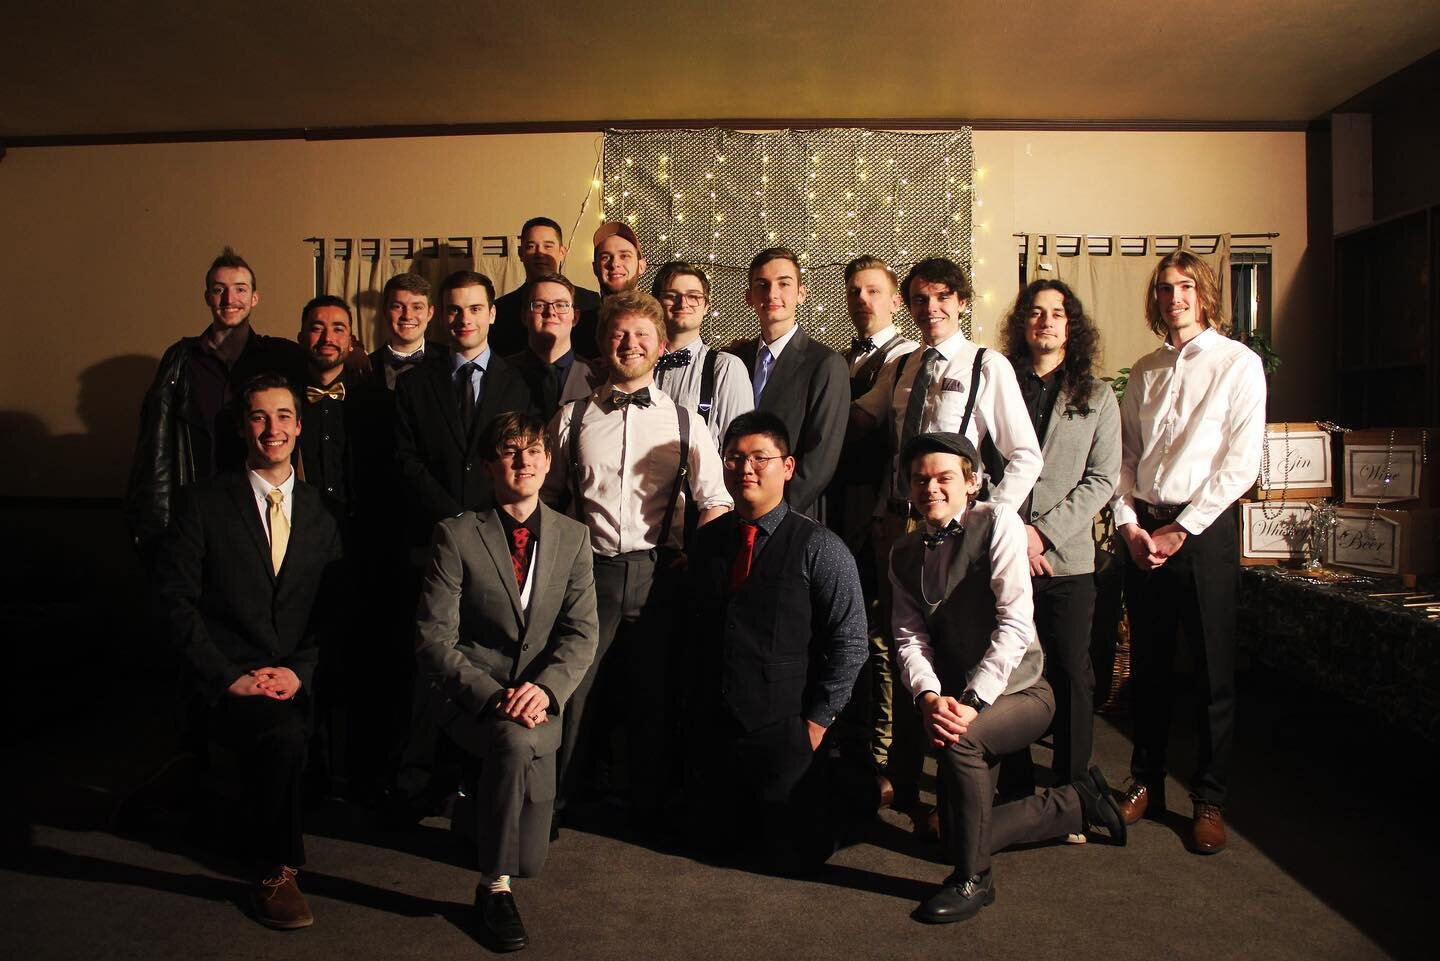 A big thanks to all those who came out to The Beaver Lodge&rsquo;s Speakeasy 2022!